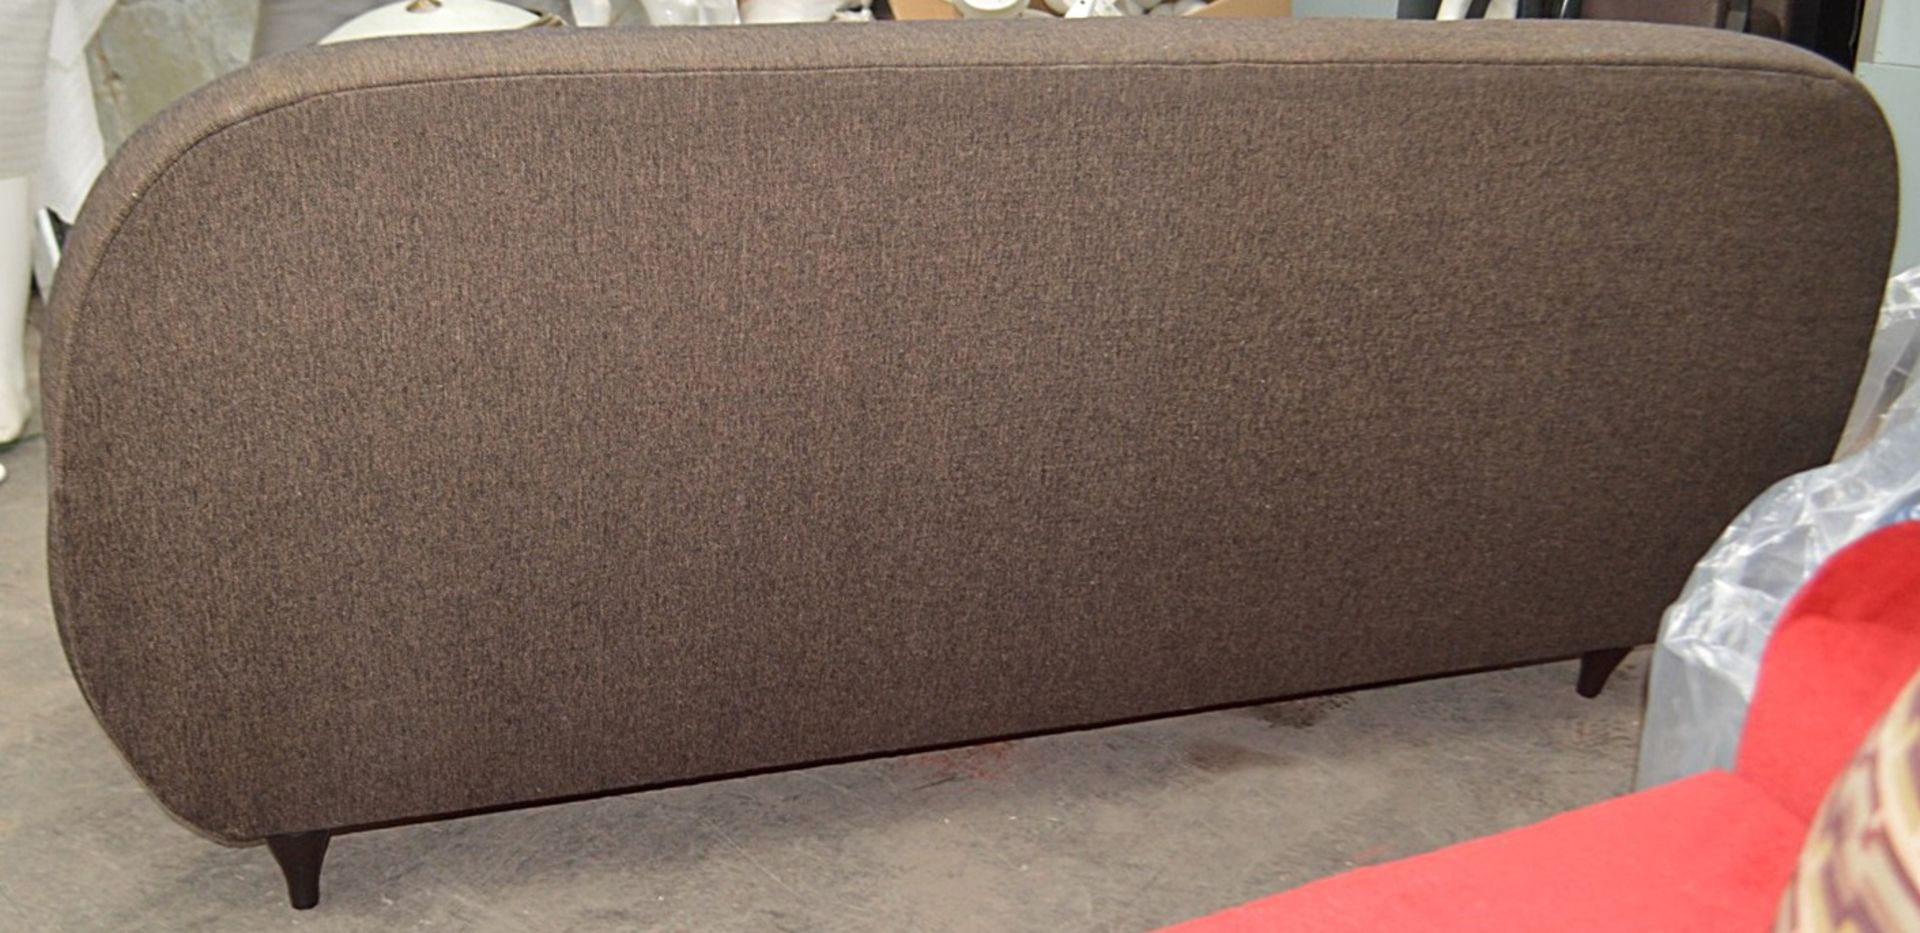 1 x Large Commercial 2-Metre Long Contemporary Sofa In A  Dark Brown/Bronze Woven Fabric - - Image 2 of 6